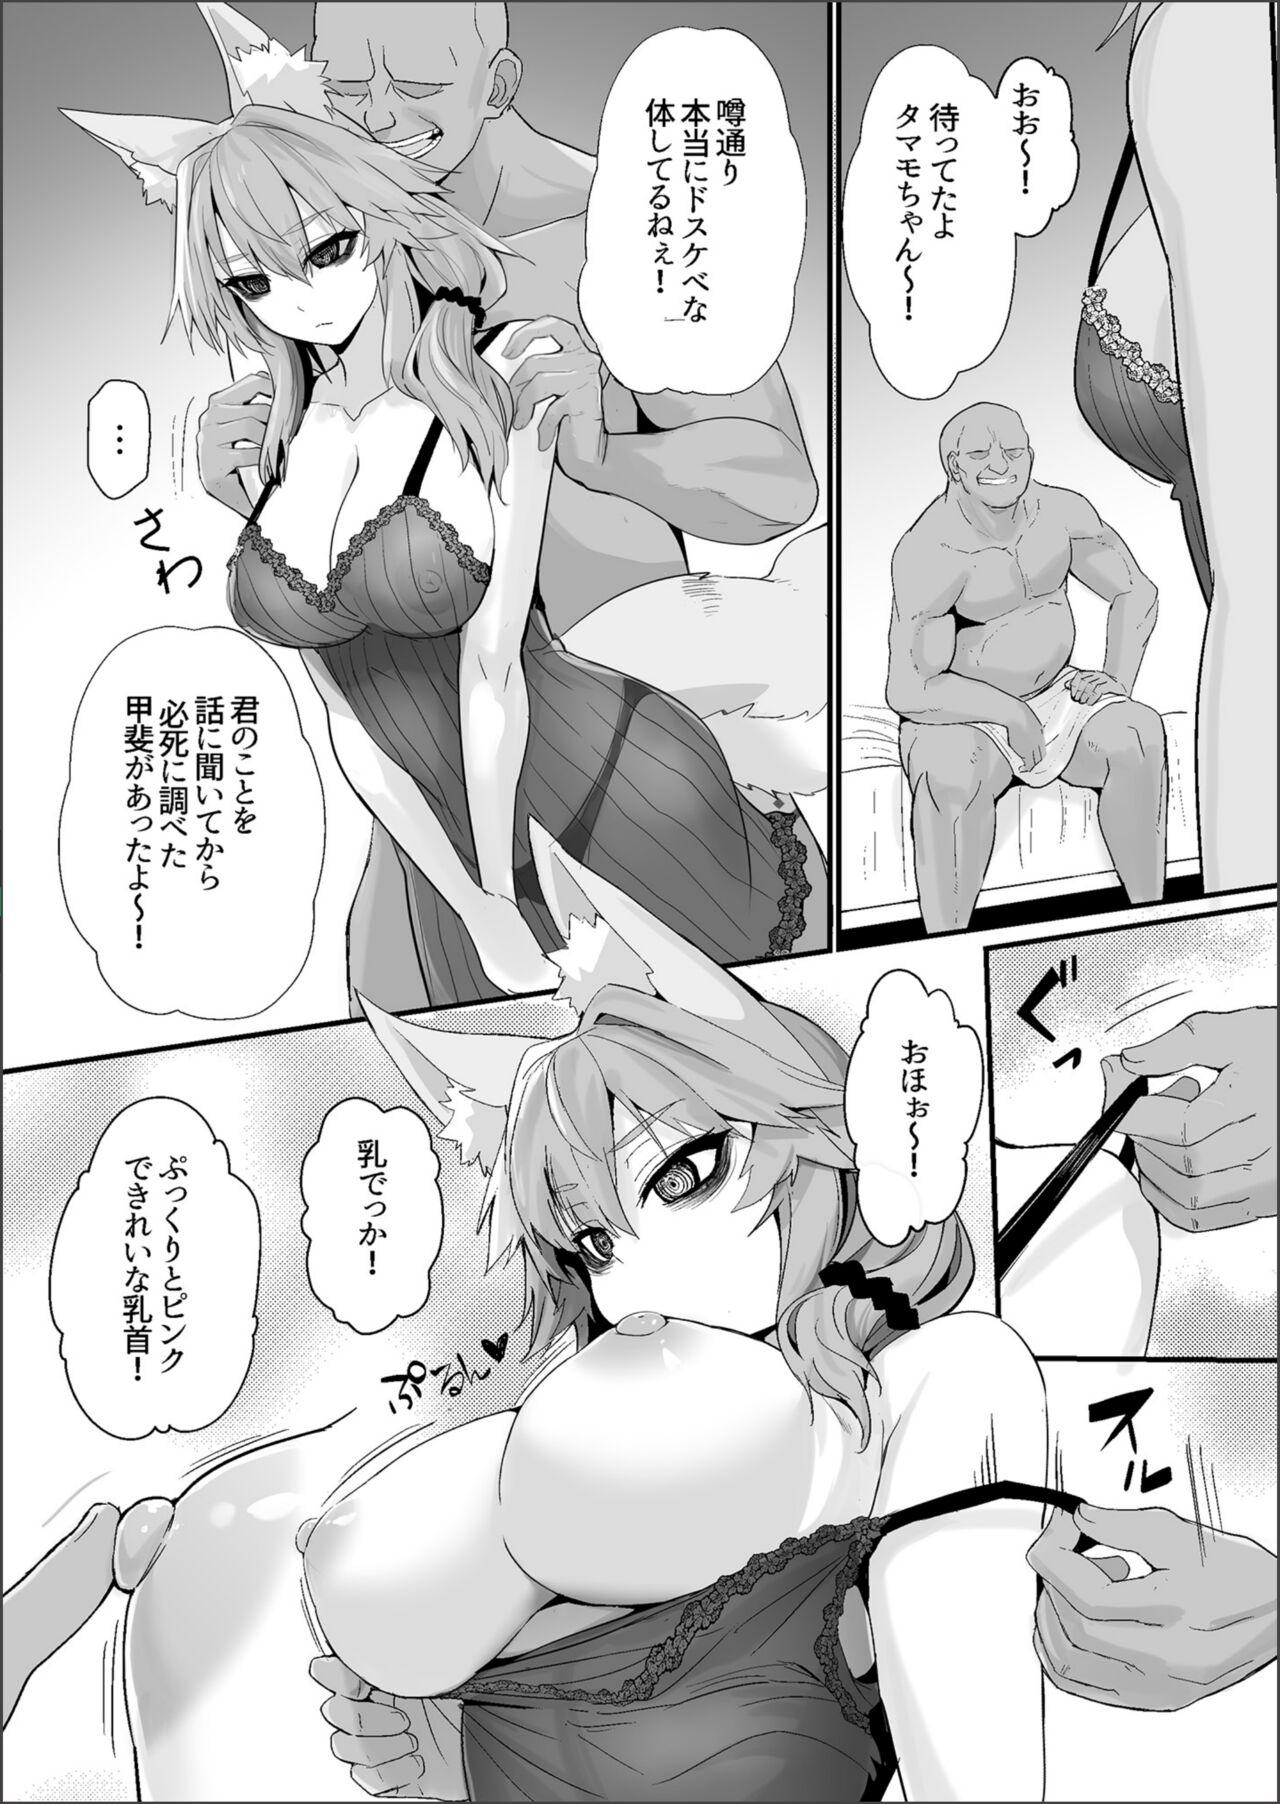 Story Dead eyes sex woker Tamamo 2 - Fate grand order Latino - Page 5